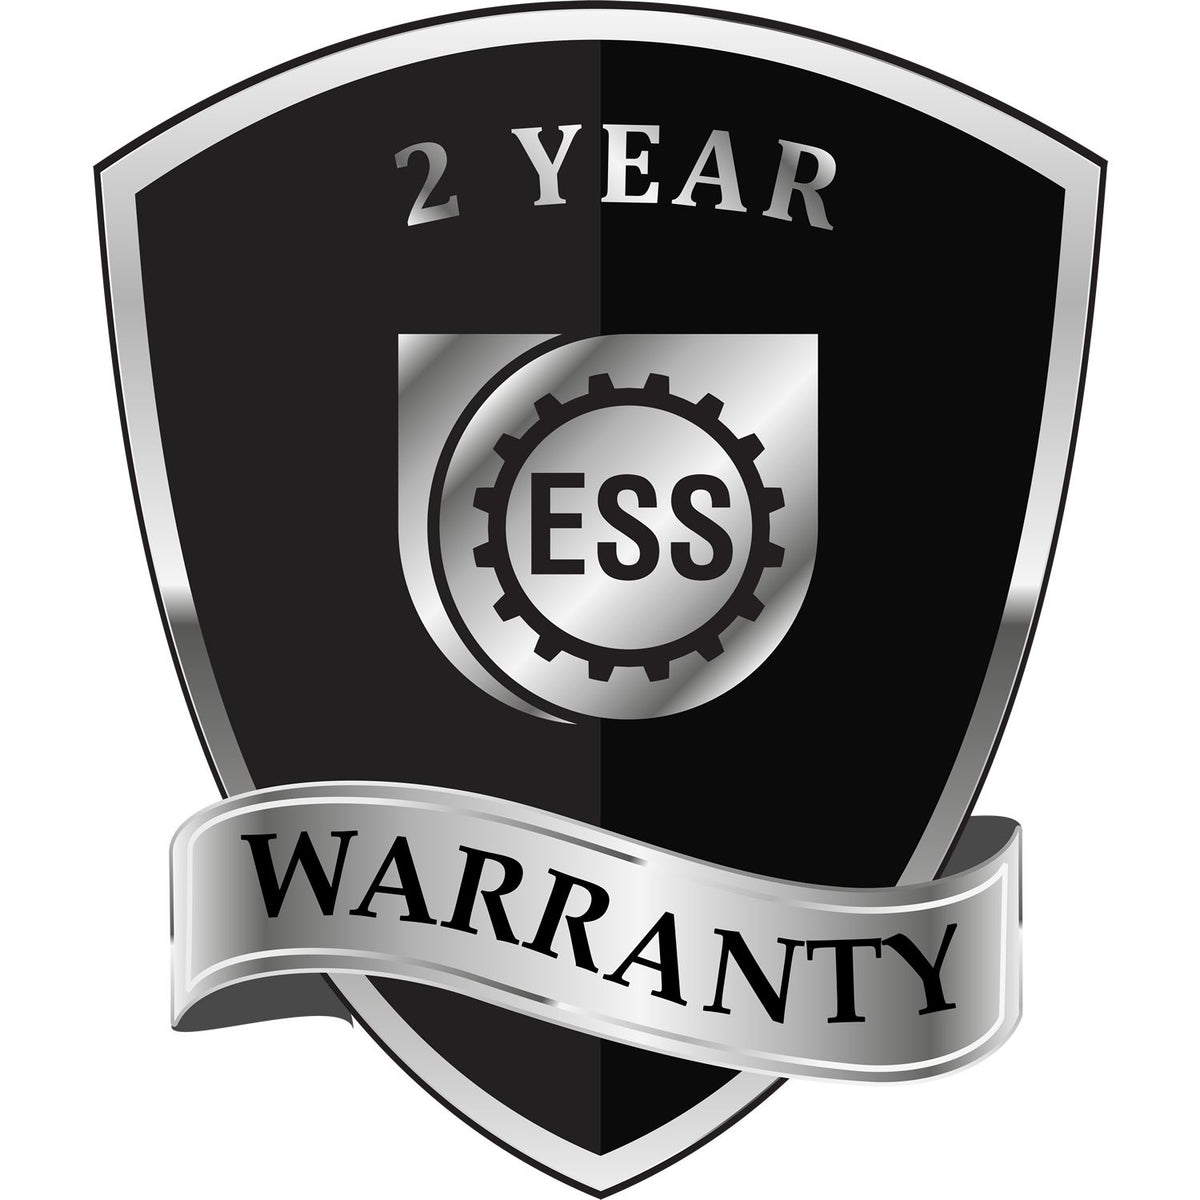 A black and silver badge or emblem showing warranty information for the Gift New Jersey Landscape Architect Seal